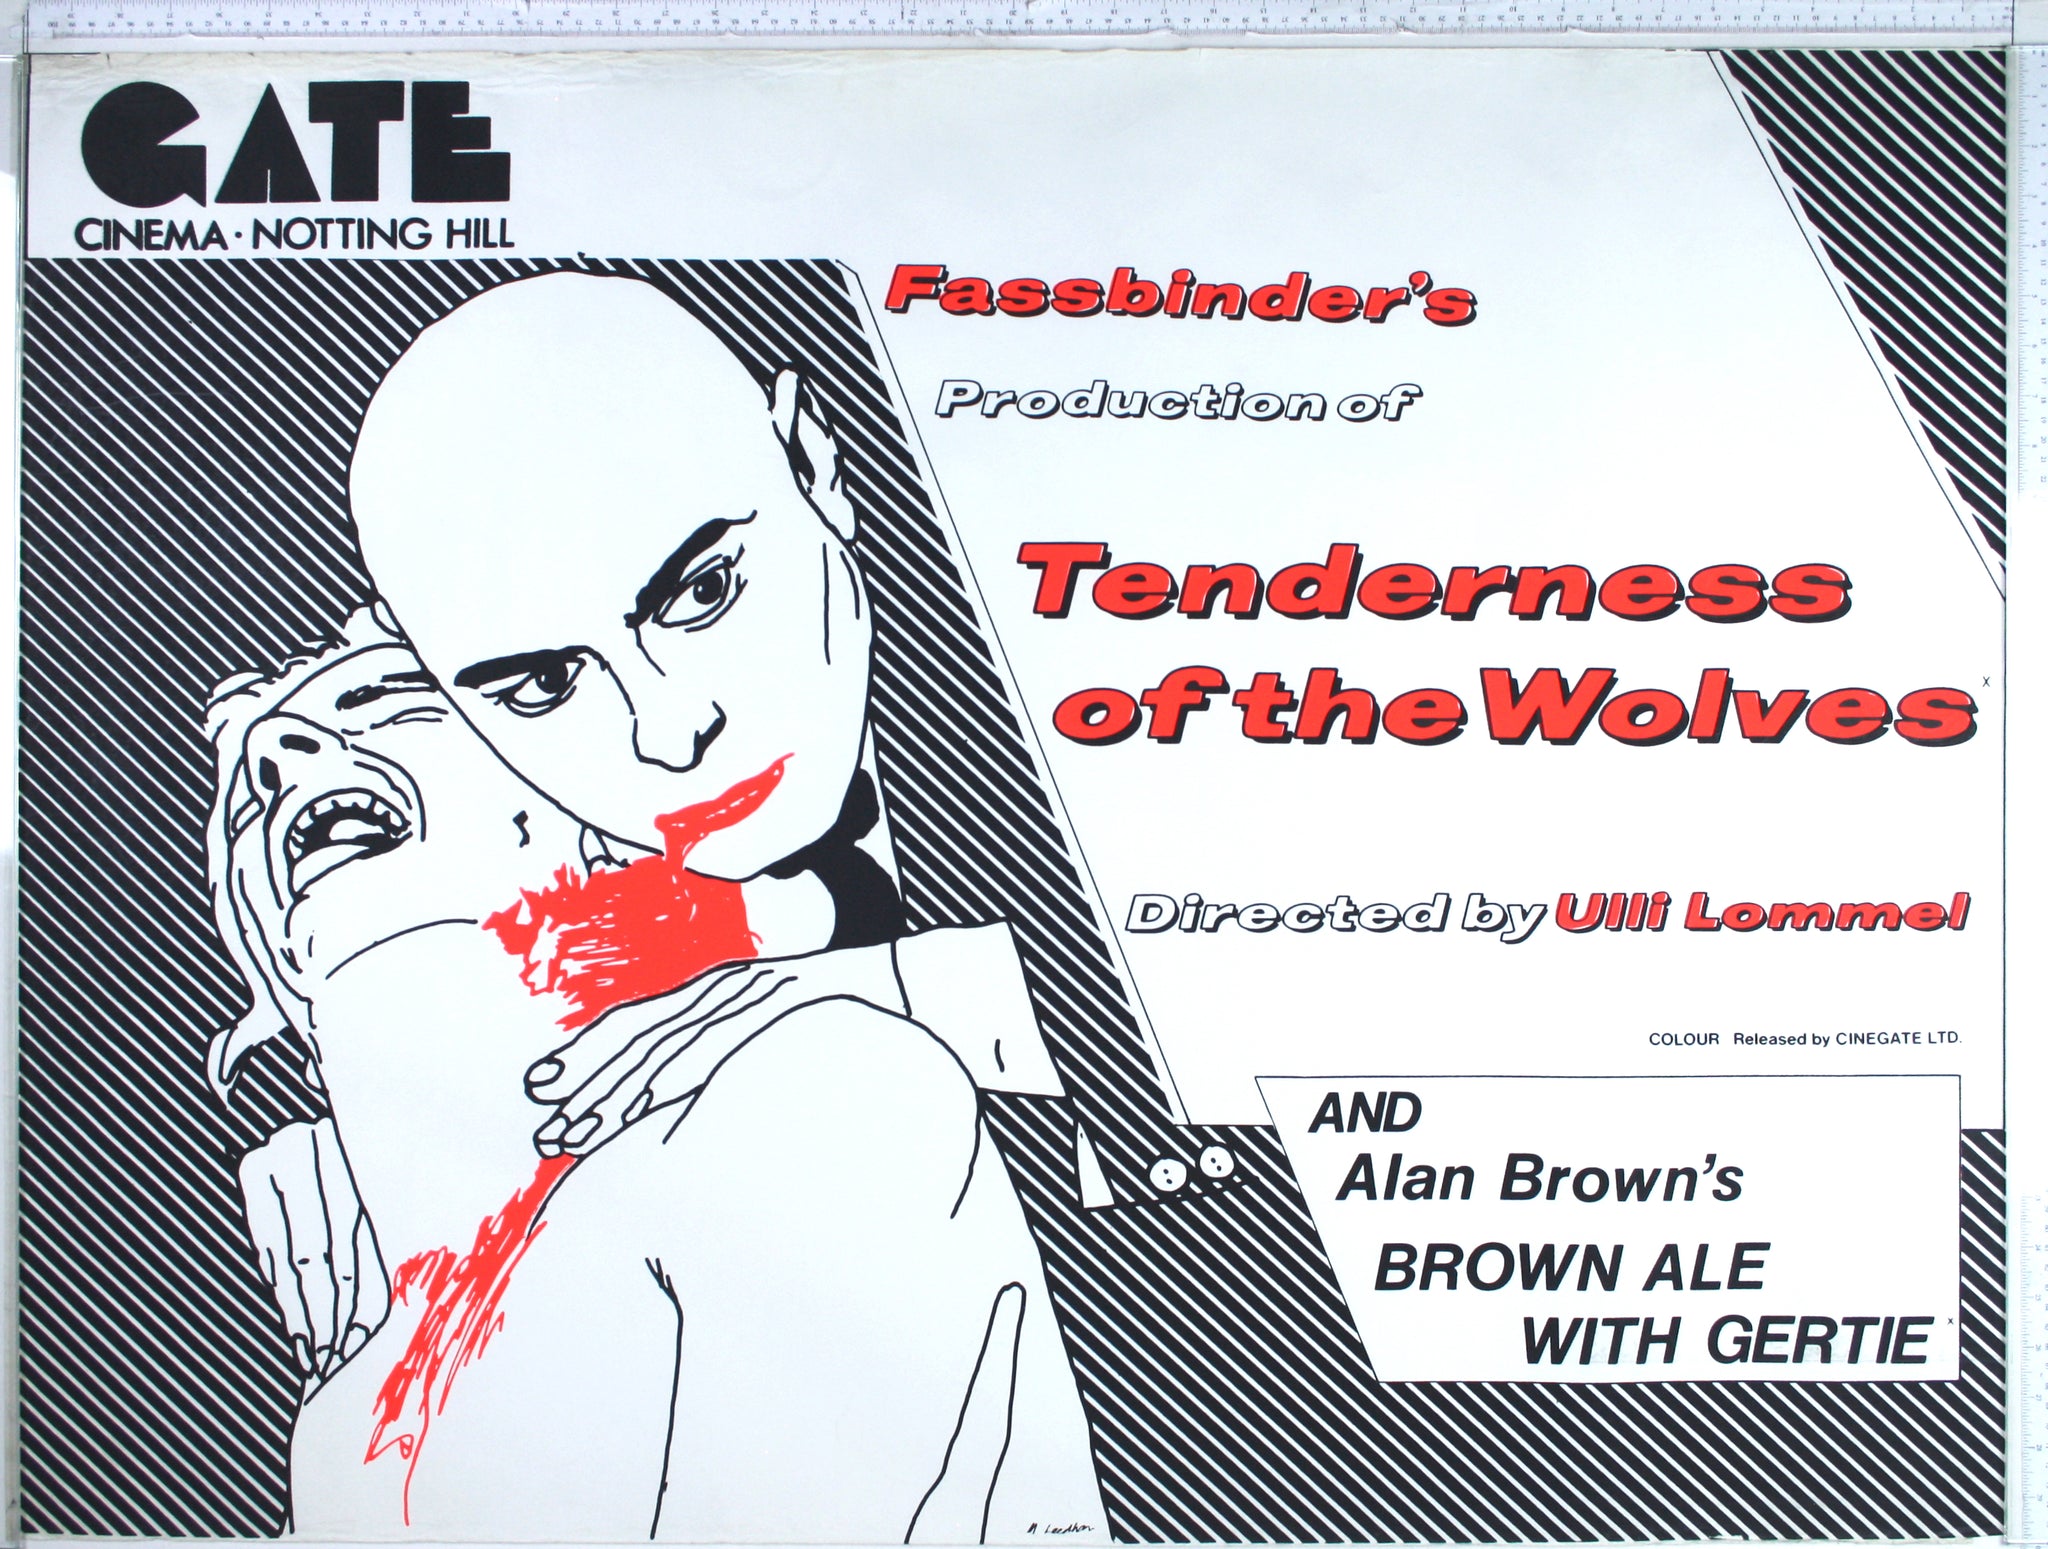 Tenderness of the Wolves (1973) UK Quad Poster